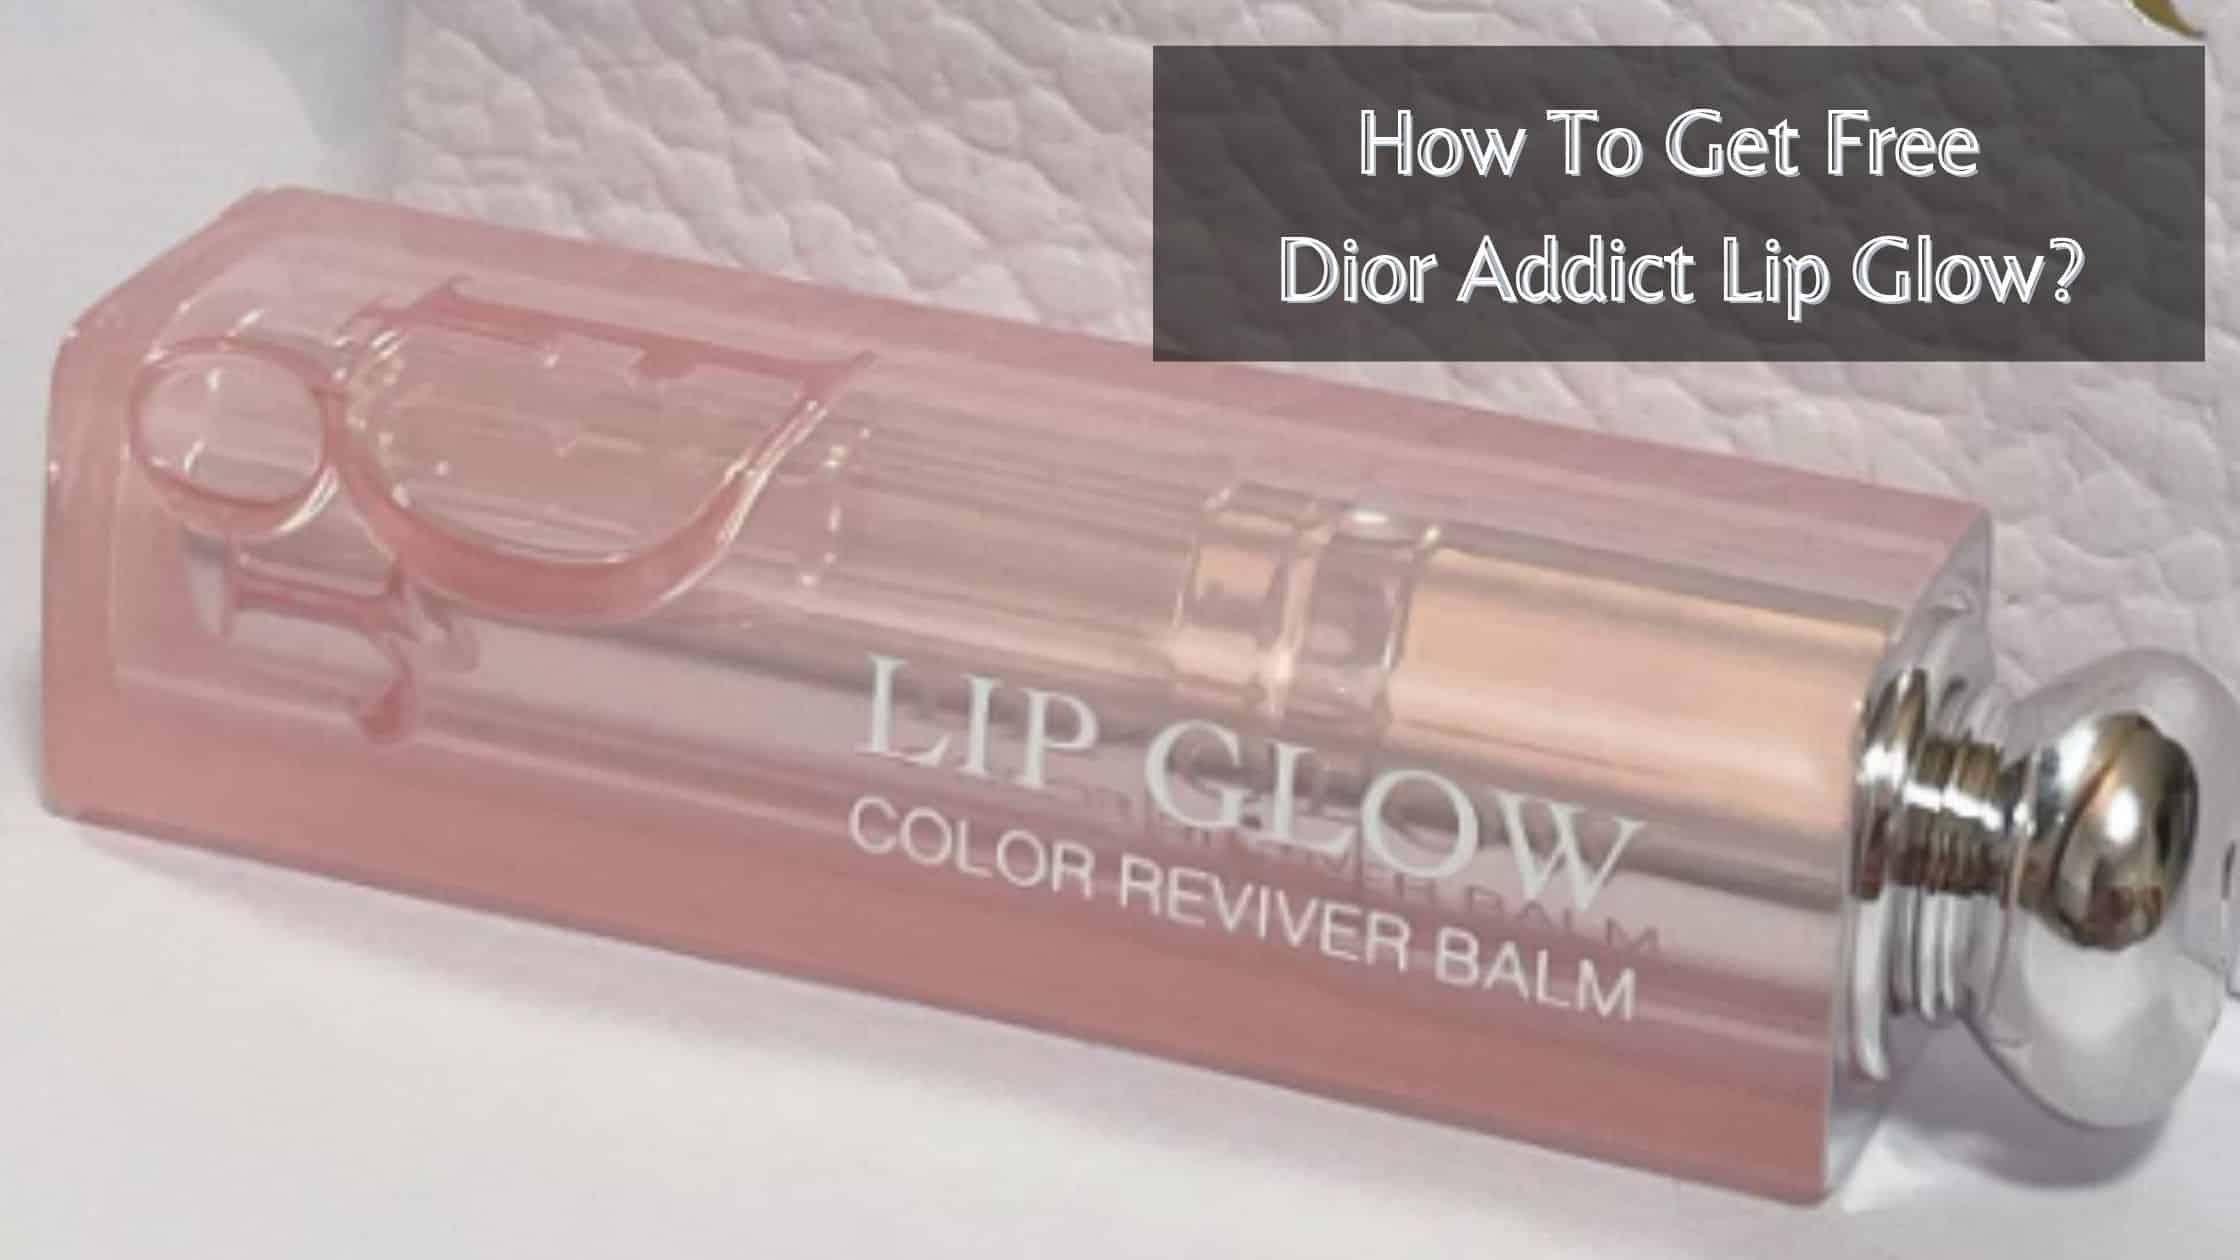 How To Get Free Dior Addict Lip Glow